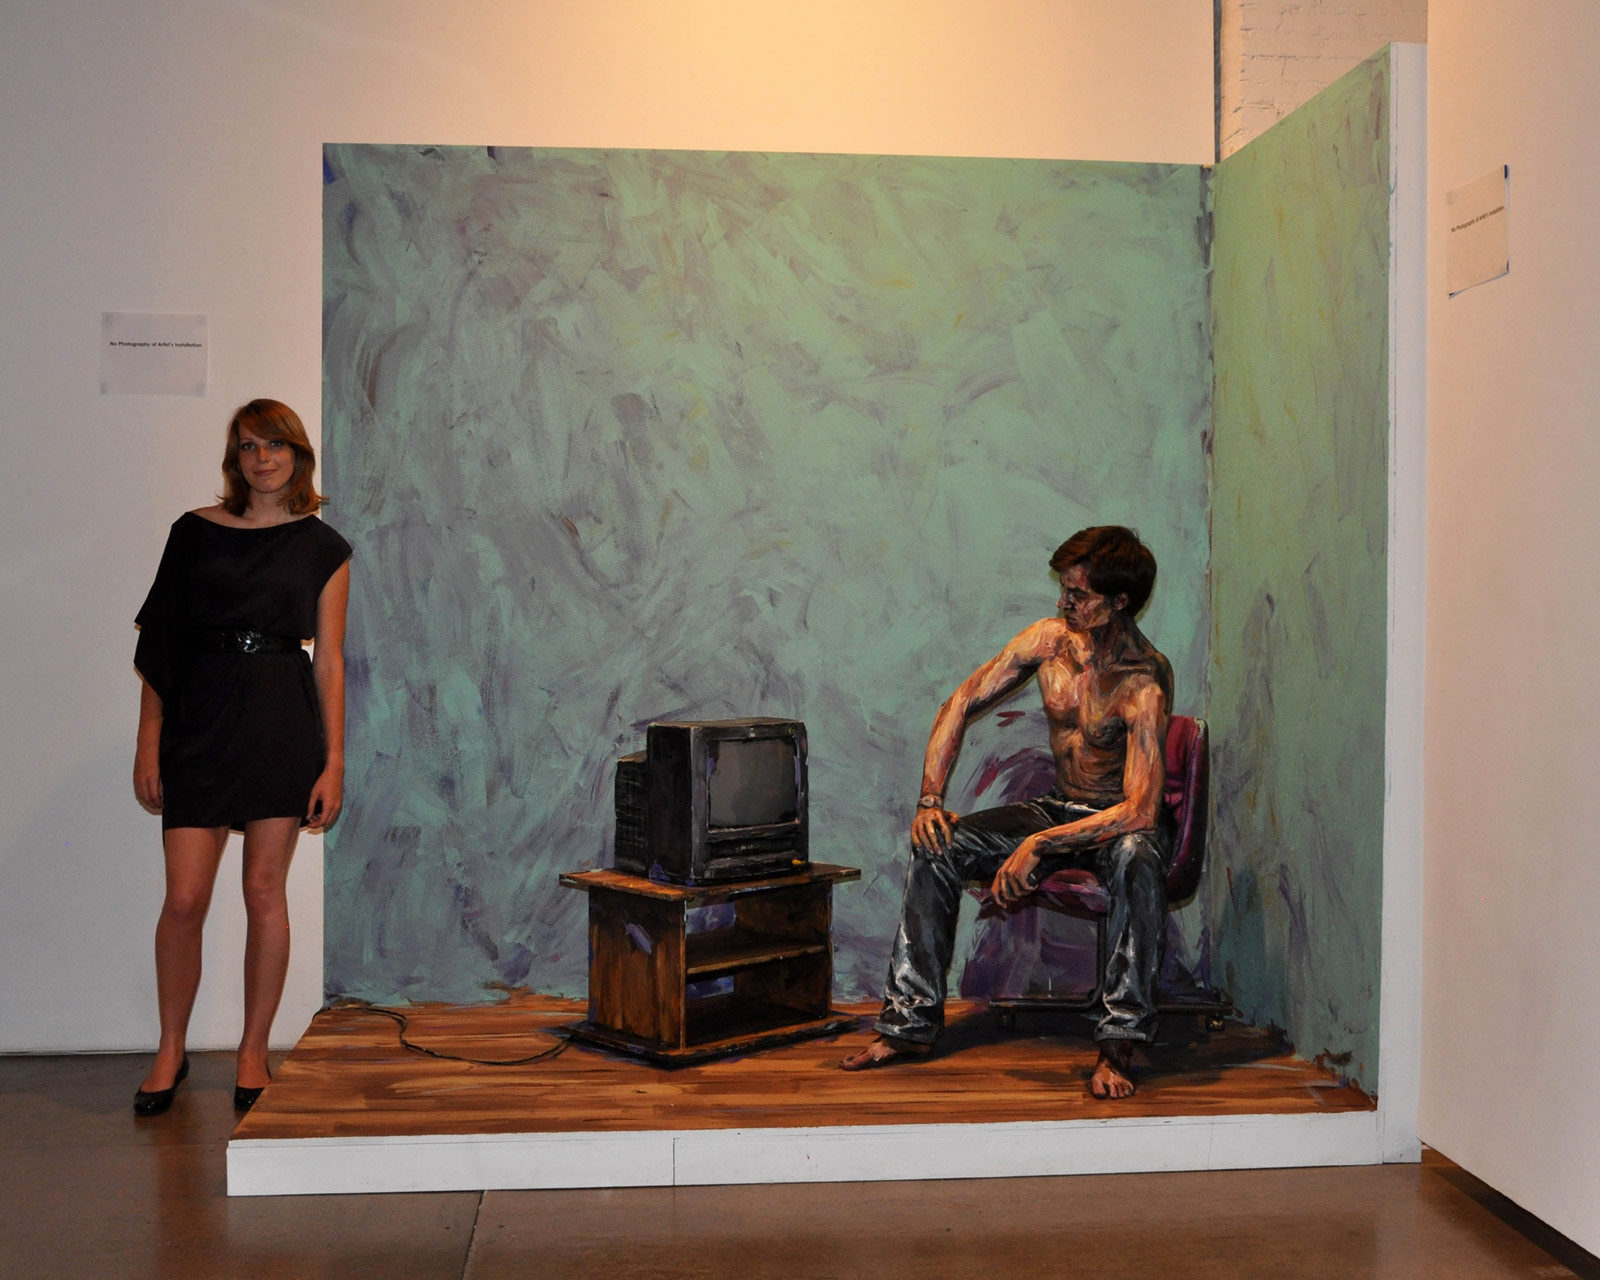 Mediation installation, Alexa stands next to her artwork, which appears 2-D when photographed